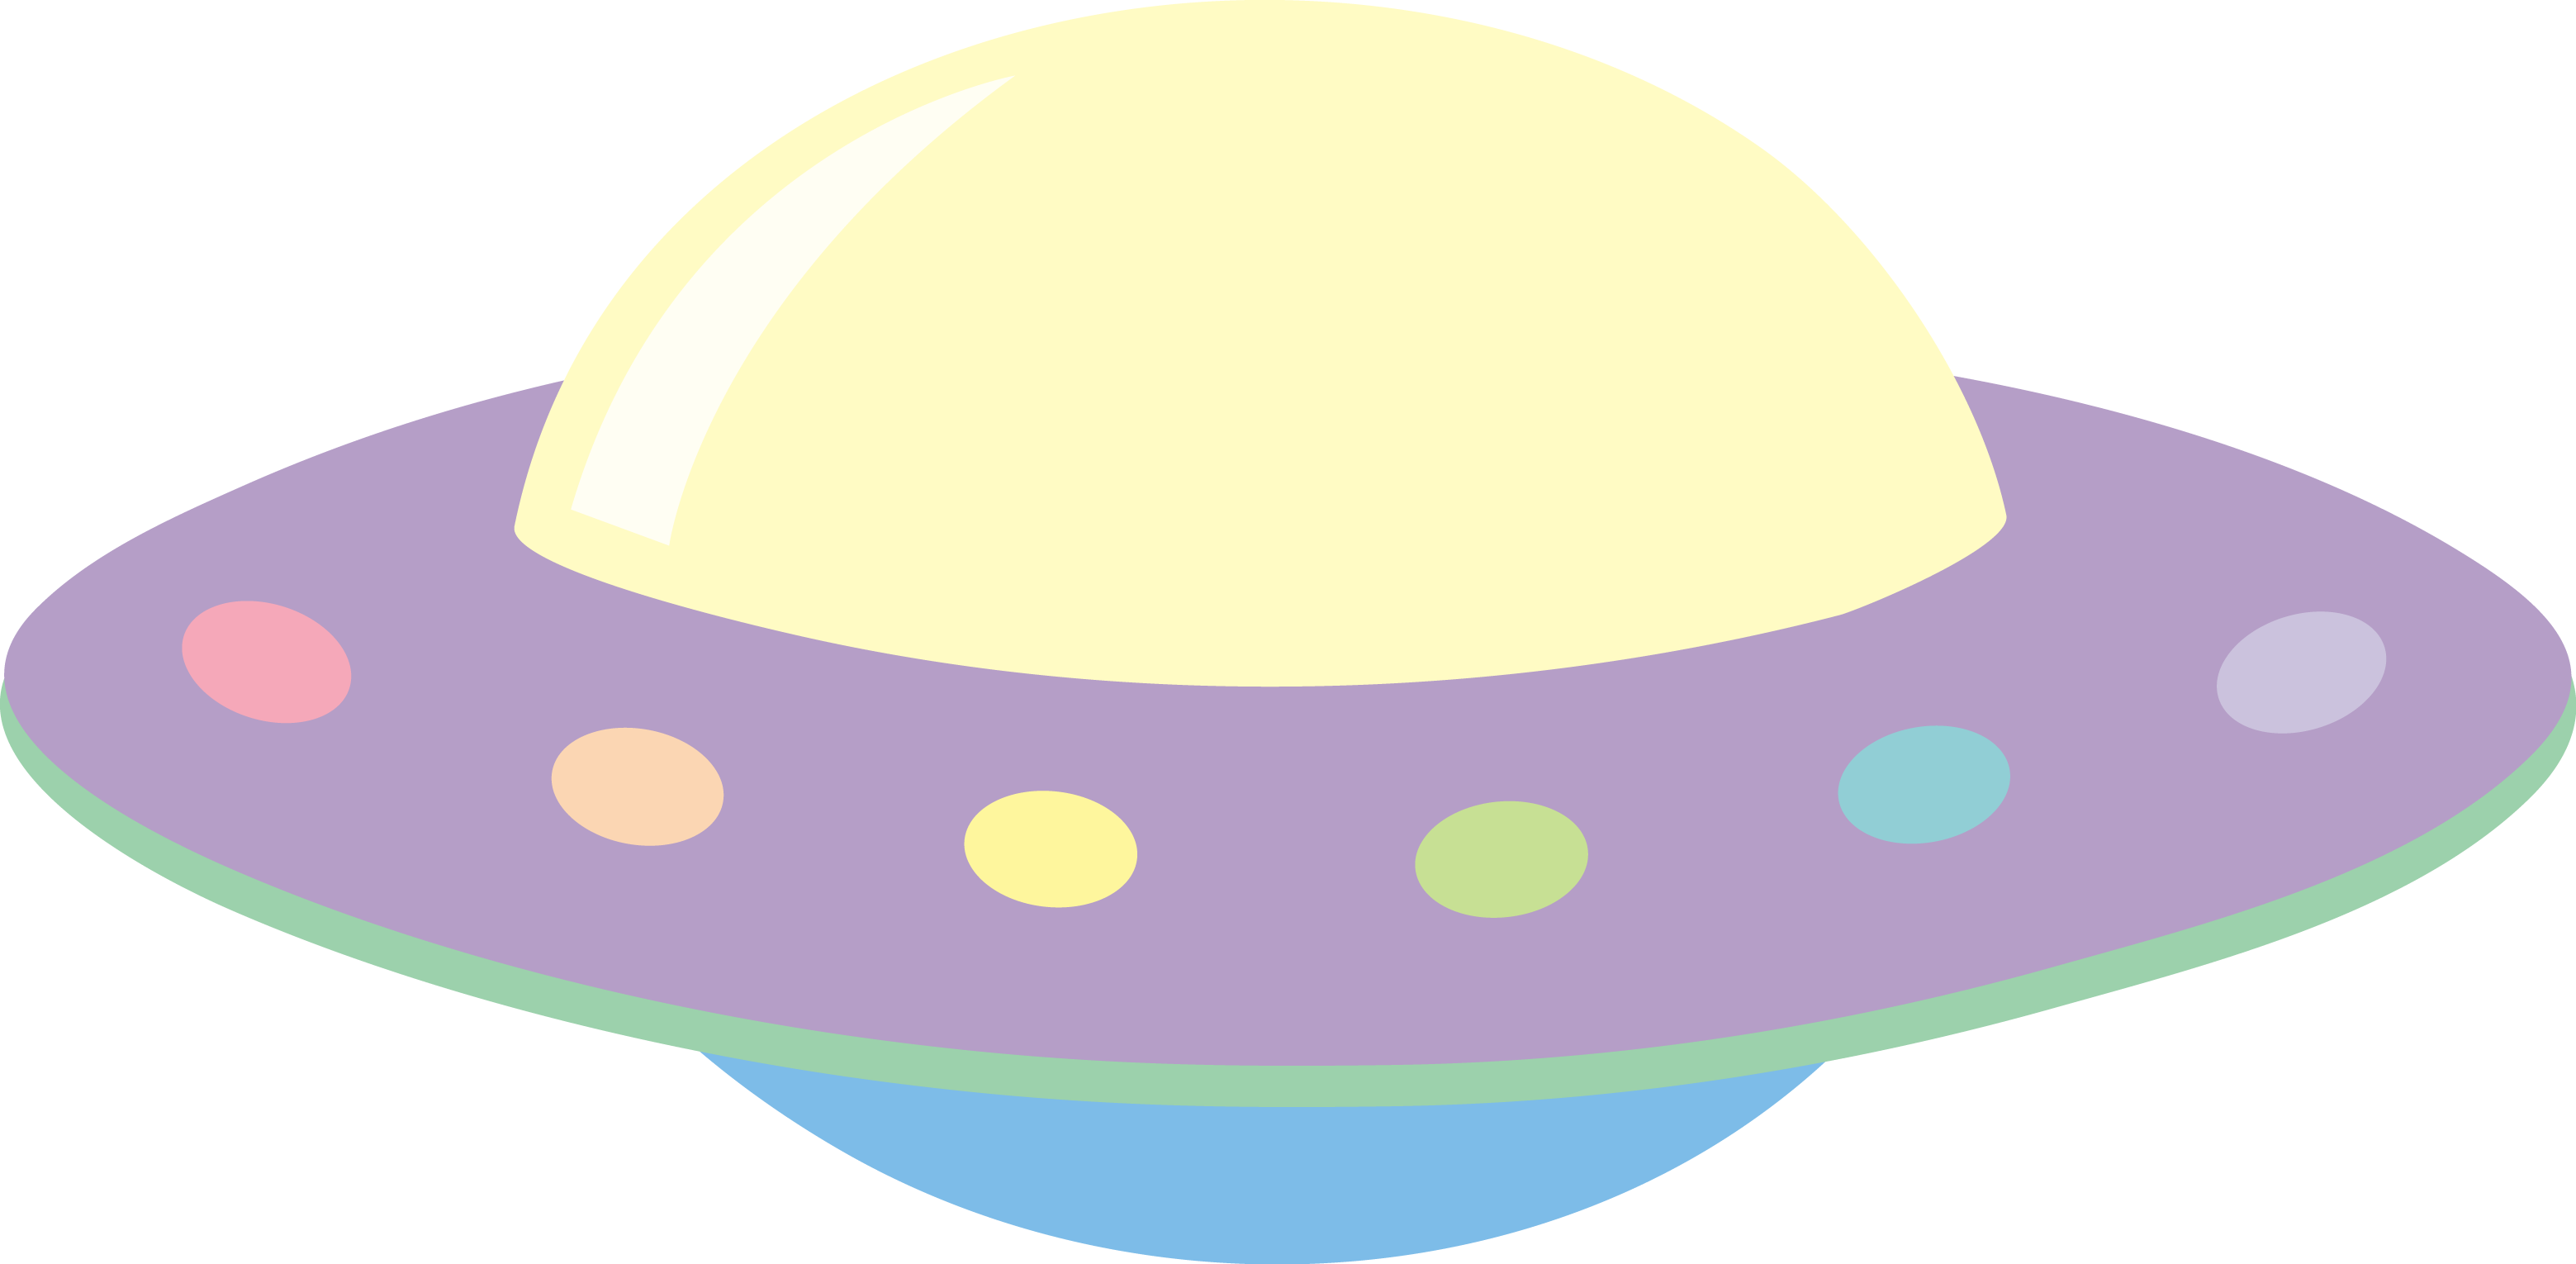 Cute Spaceship Png Image Clipart